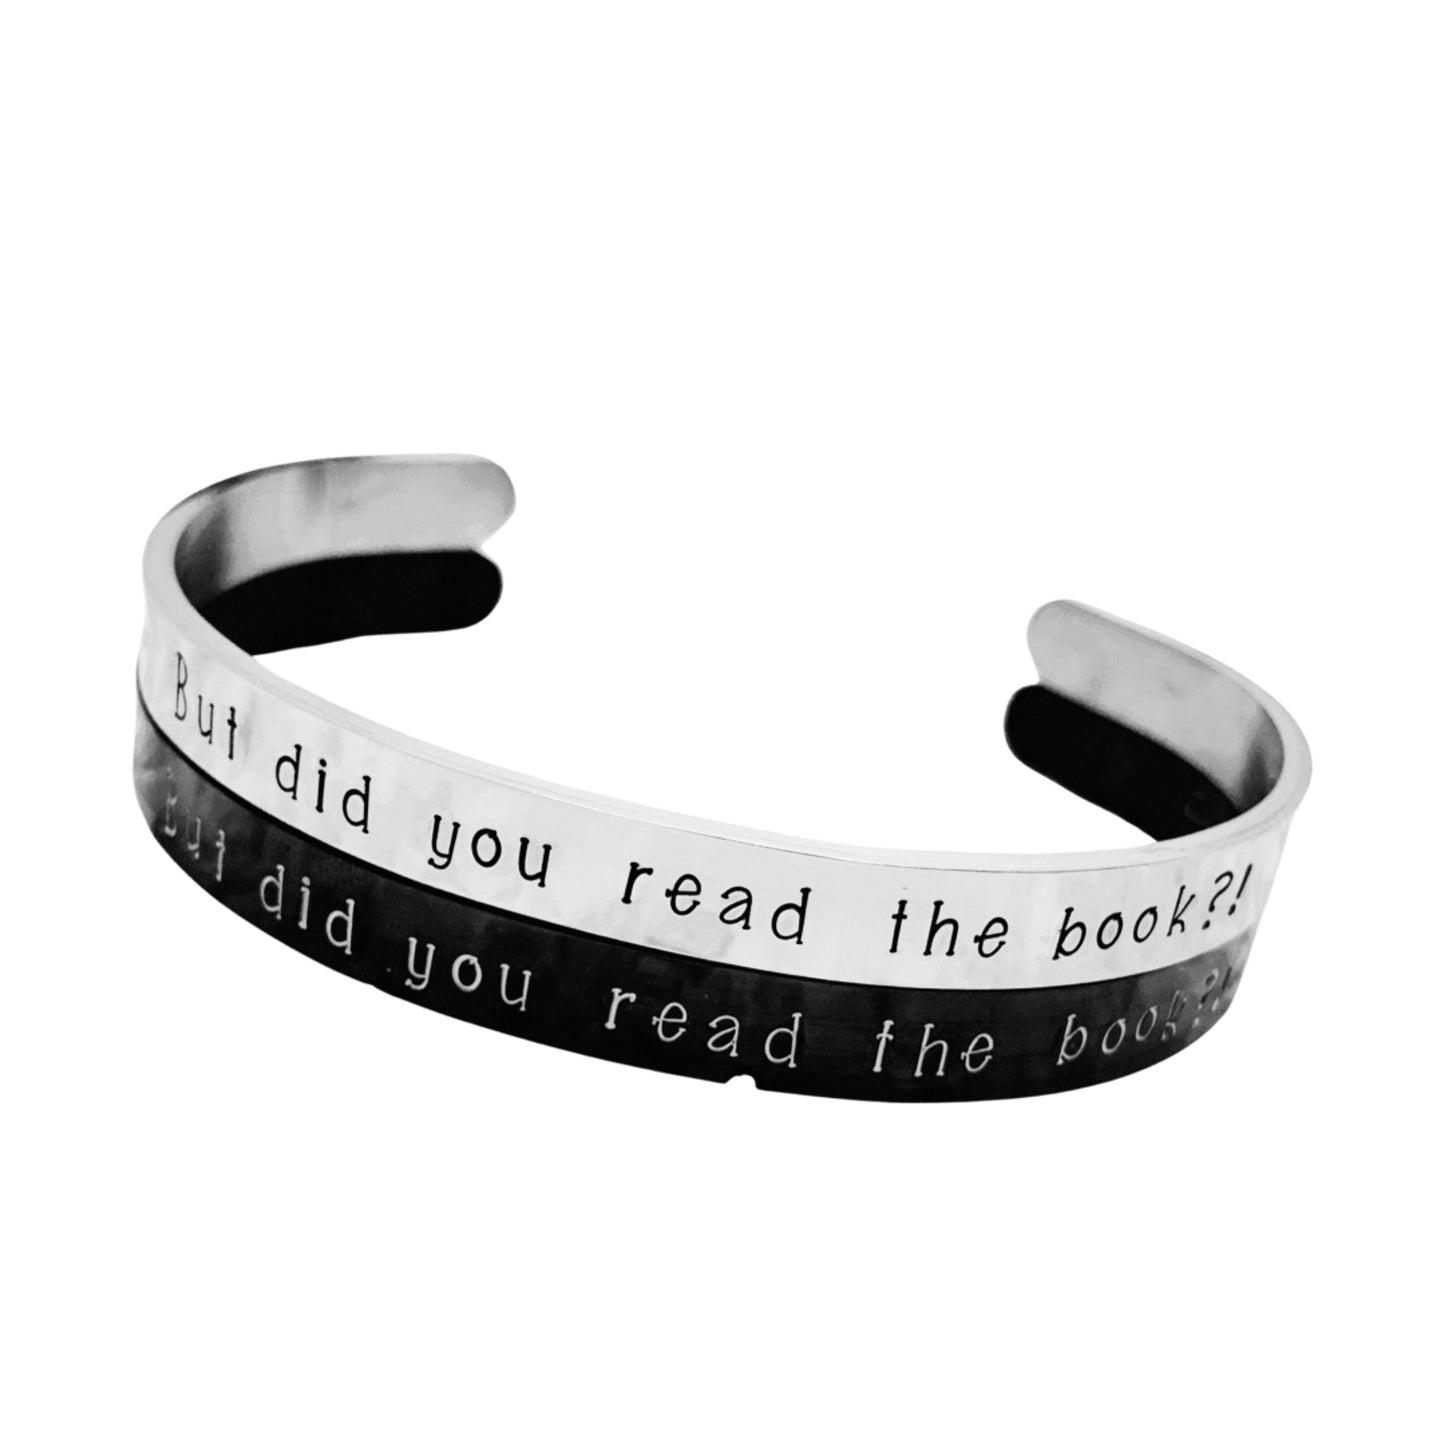 But did you read the book?! - Cuff Bracelet